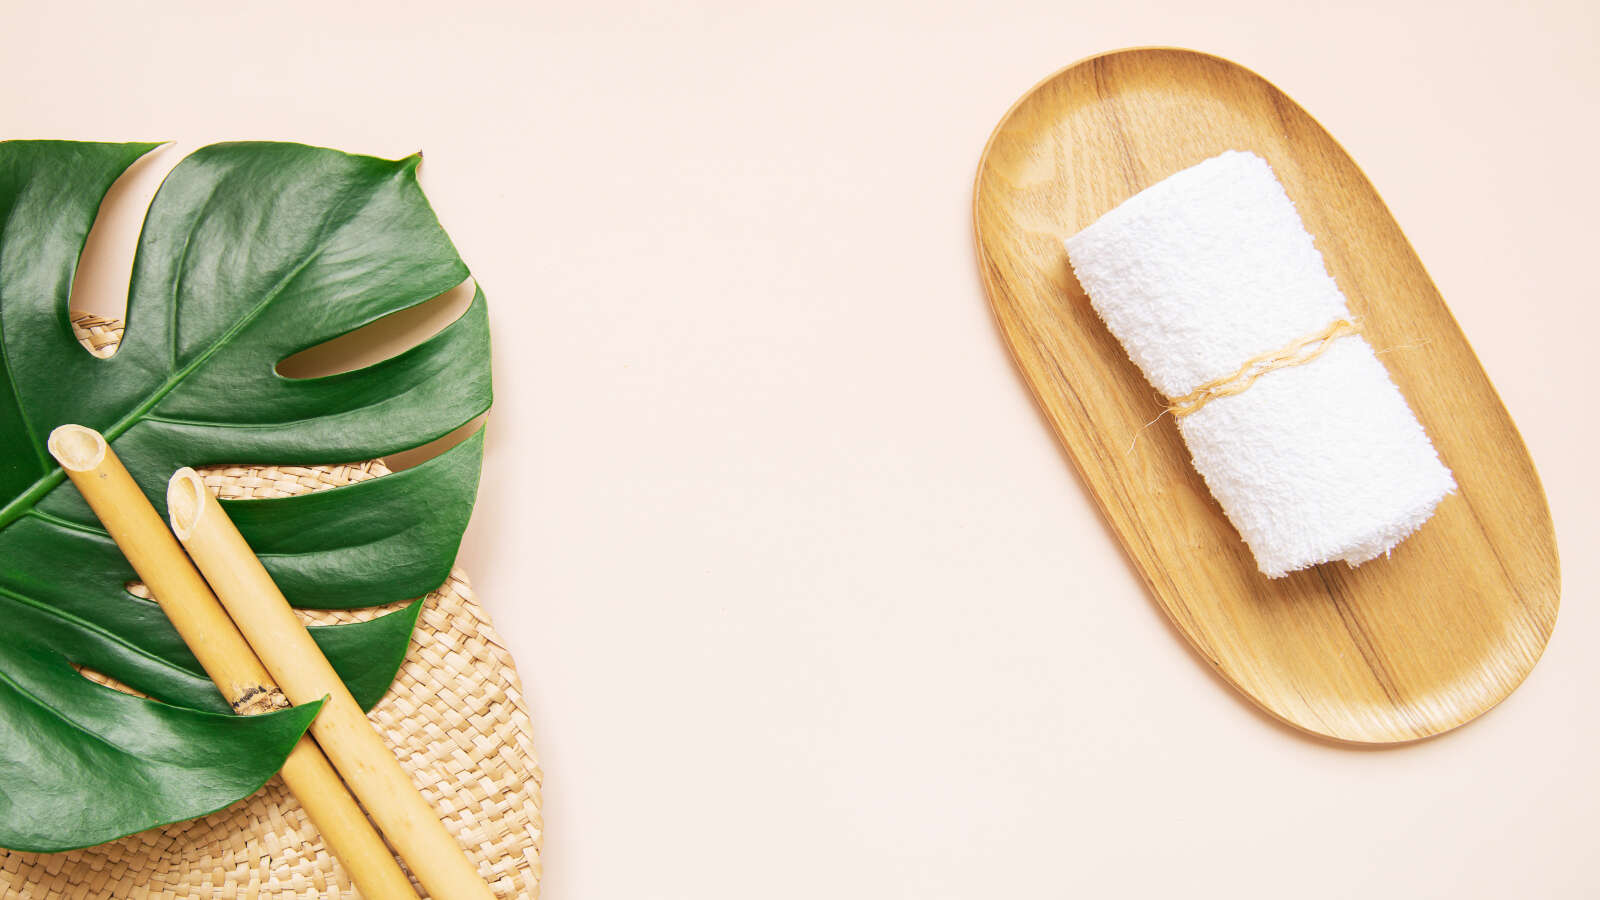 Discover bamboo fibre: its characteristics and how to care for it